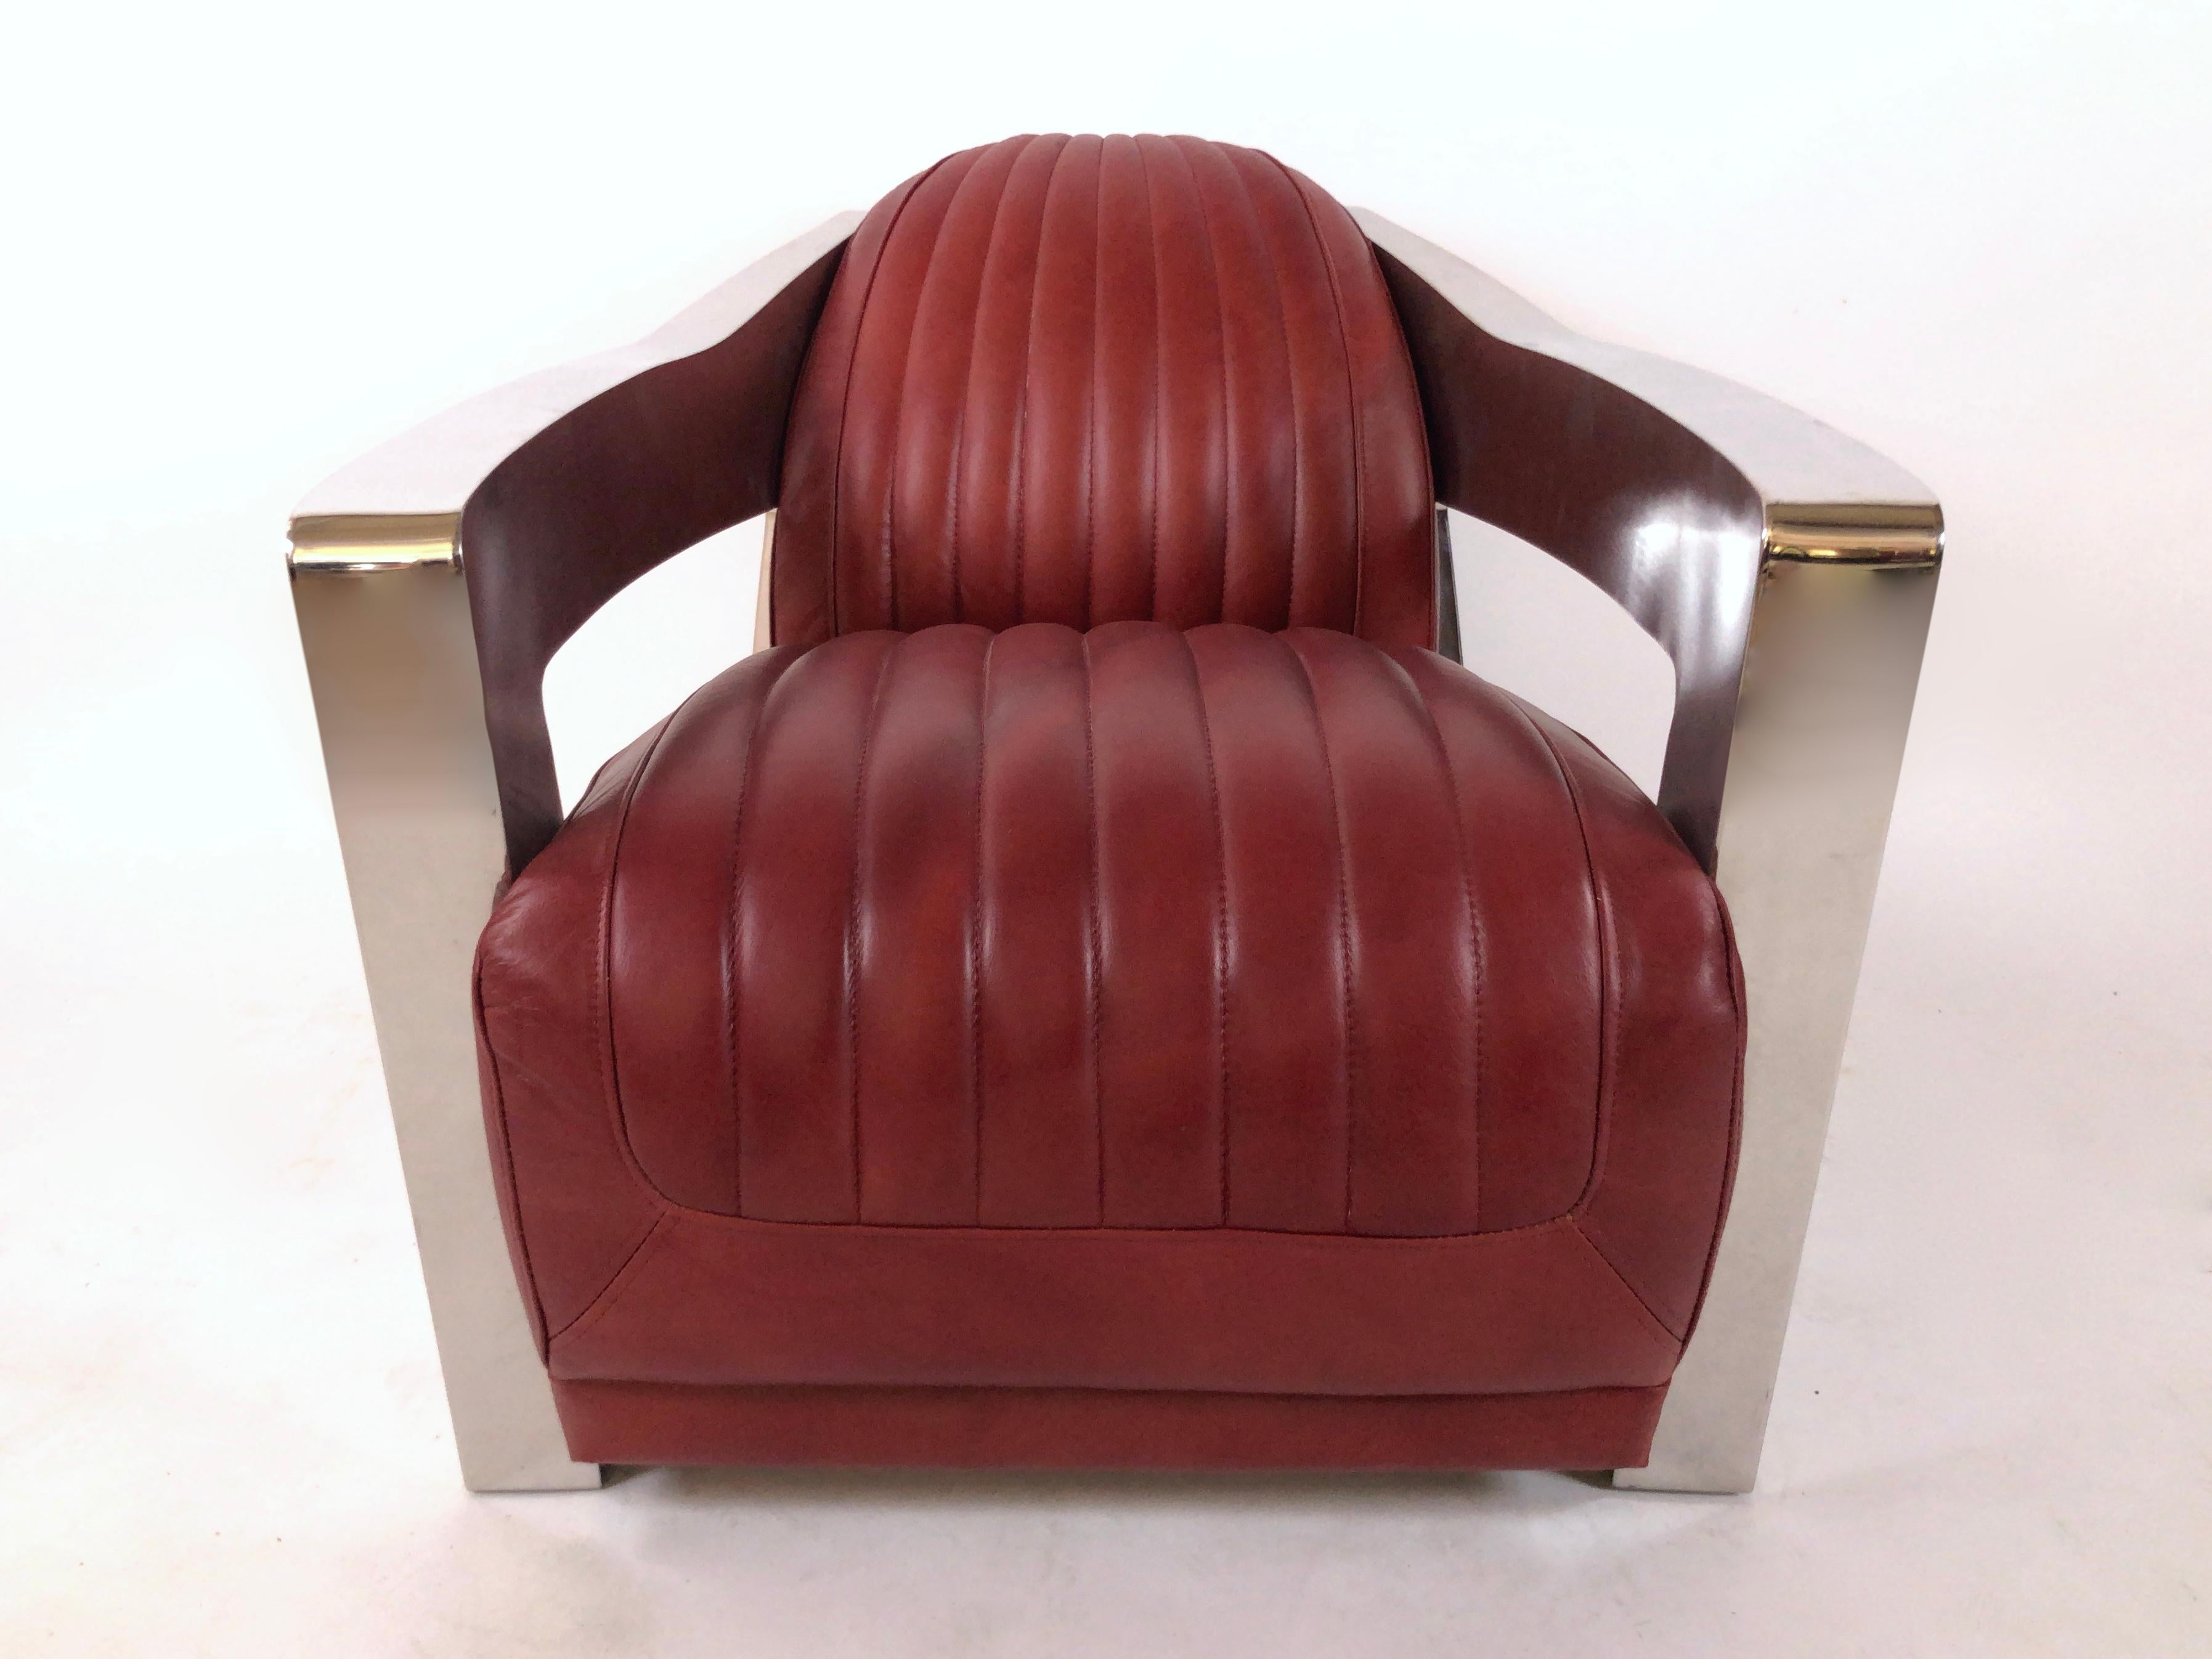 Aviator chair in style of Art Deco 
Industrial design 

Faux red leather 
Chromed metal 

Dimensions: 
Width 85 cm
Height 70 cm
Depth 71 cm 
Seat width 55 cm
Seat height 40 cm 
Seat depth 55 cm.